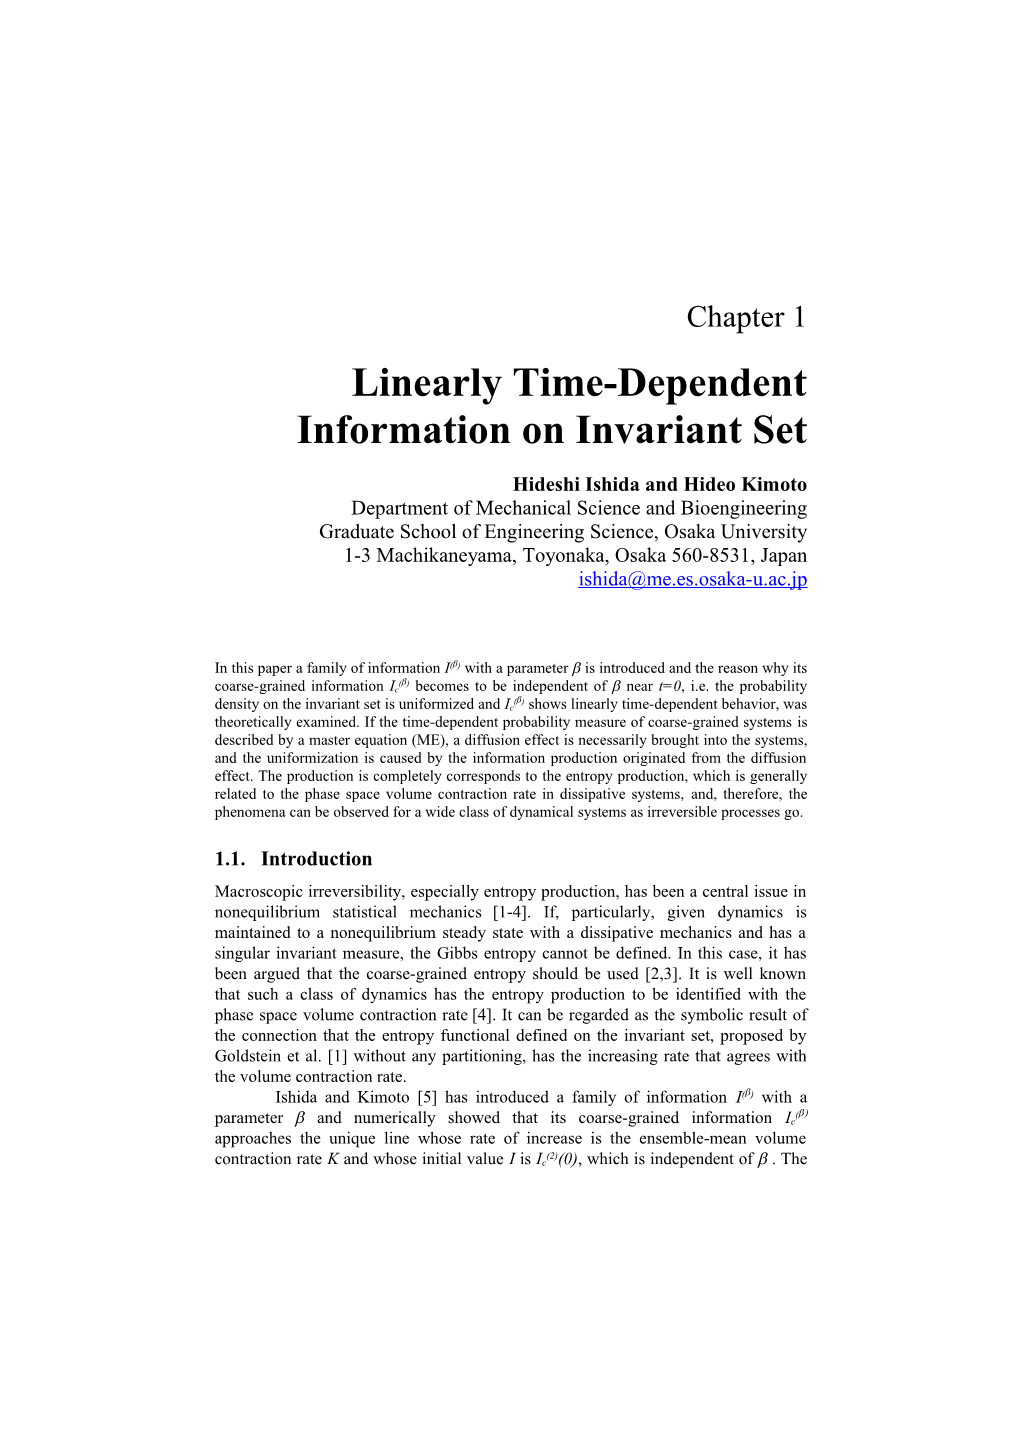 Linearly Time-Dependent